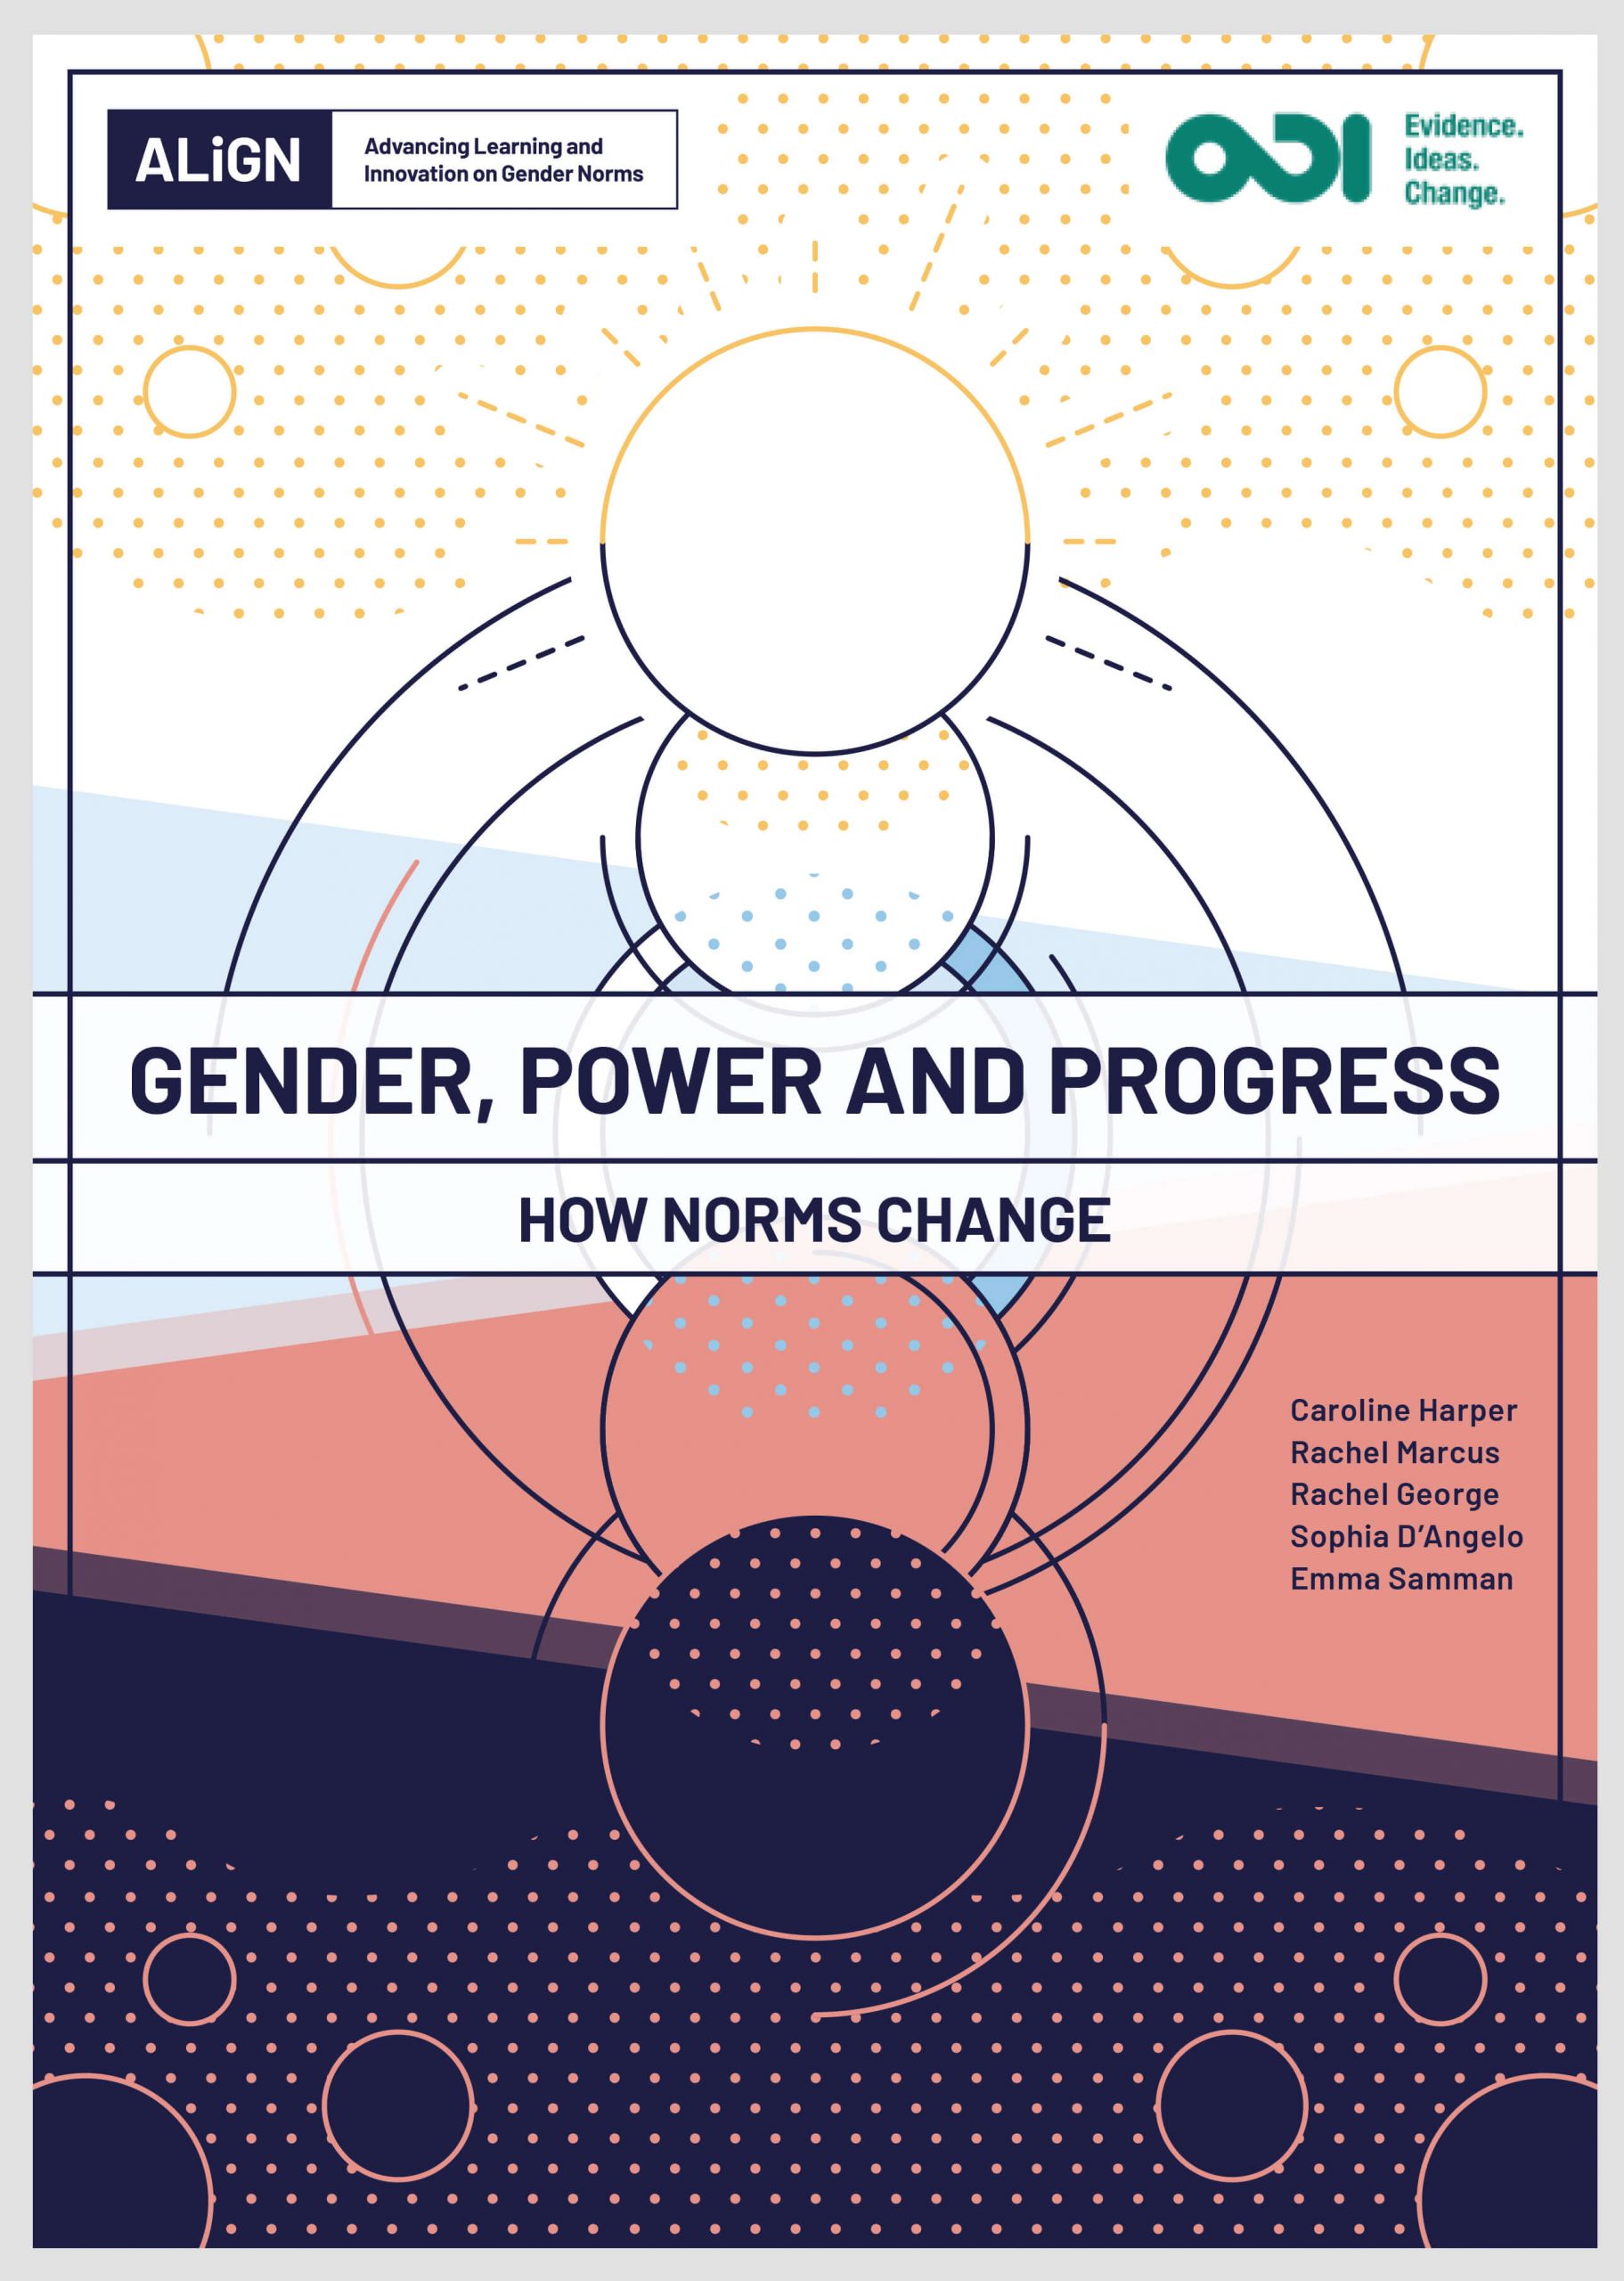 Gender, power and progress: How norms change